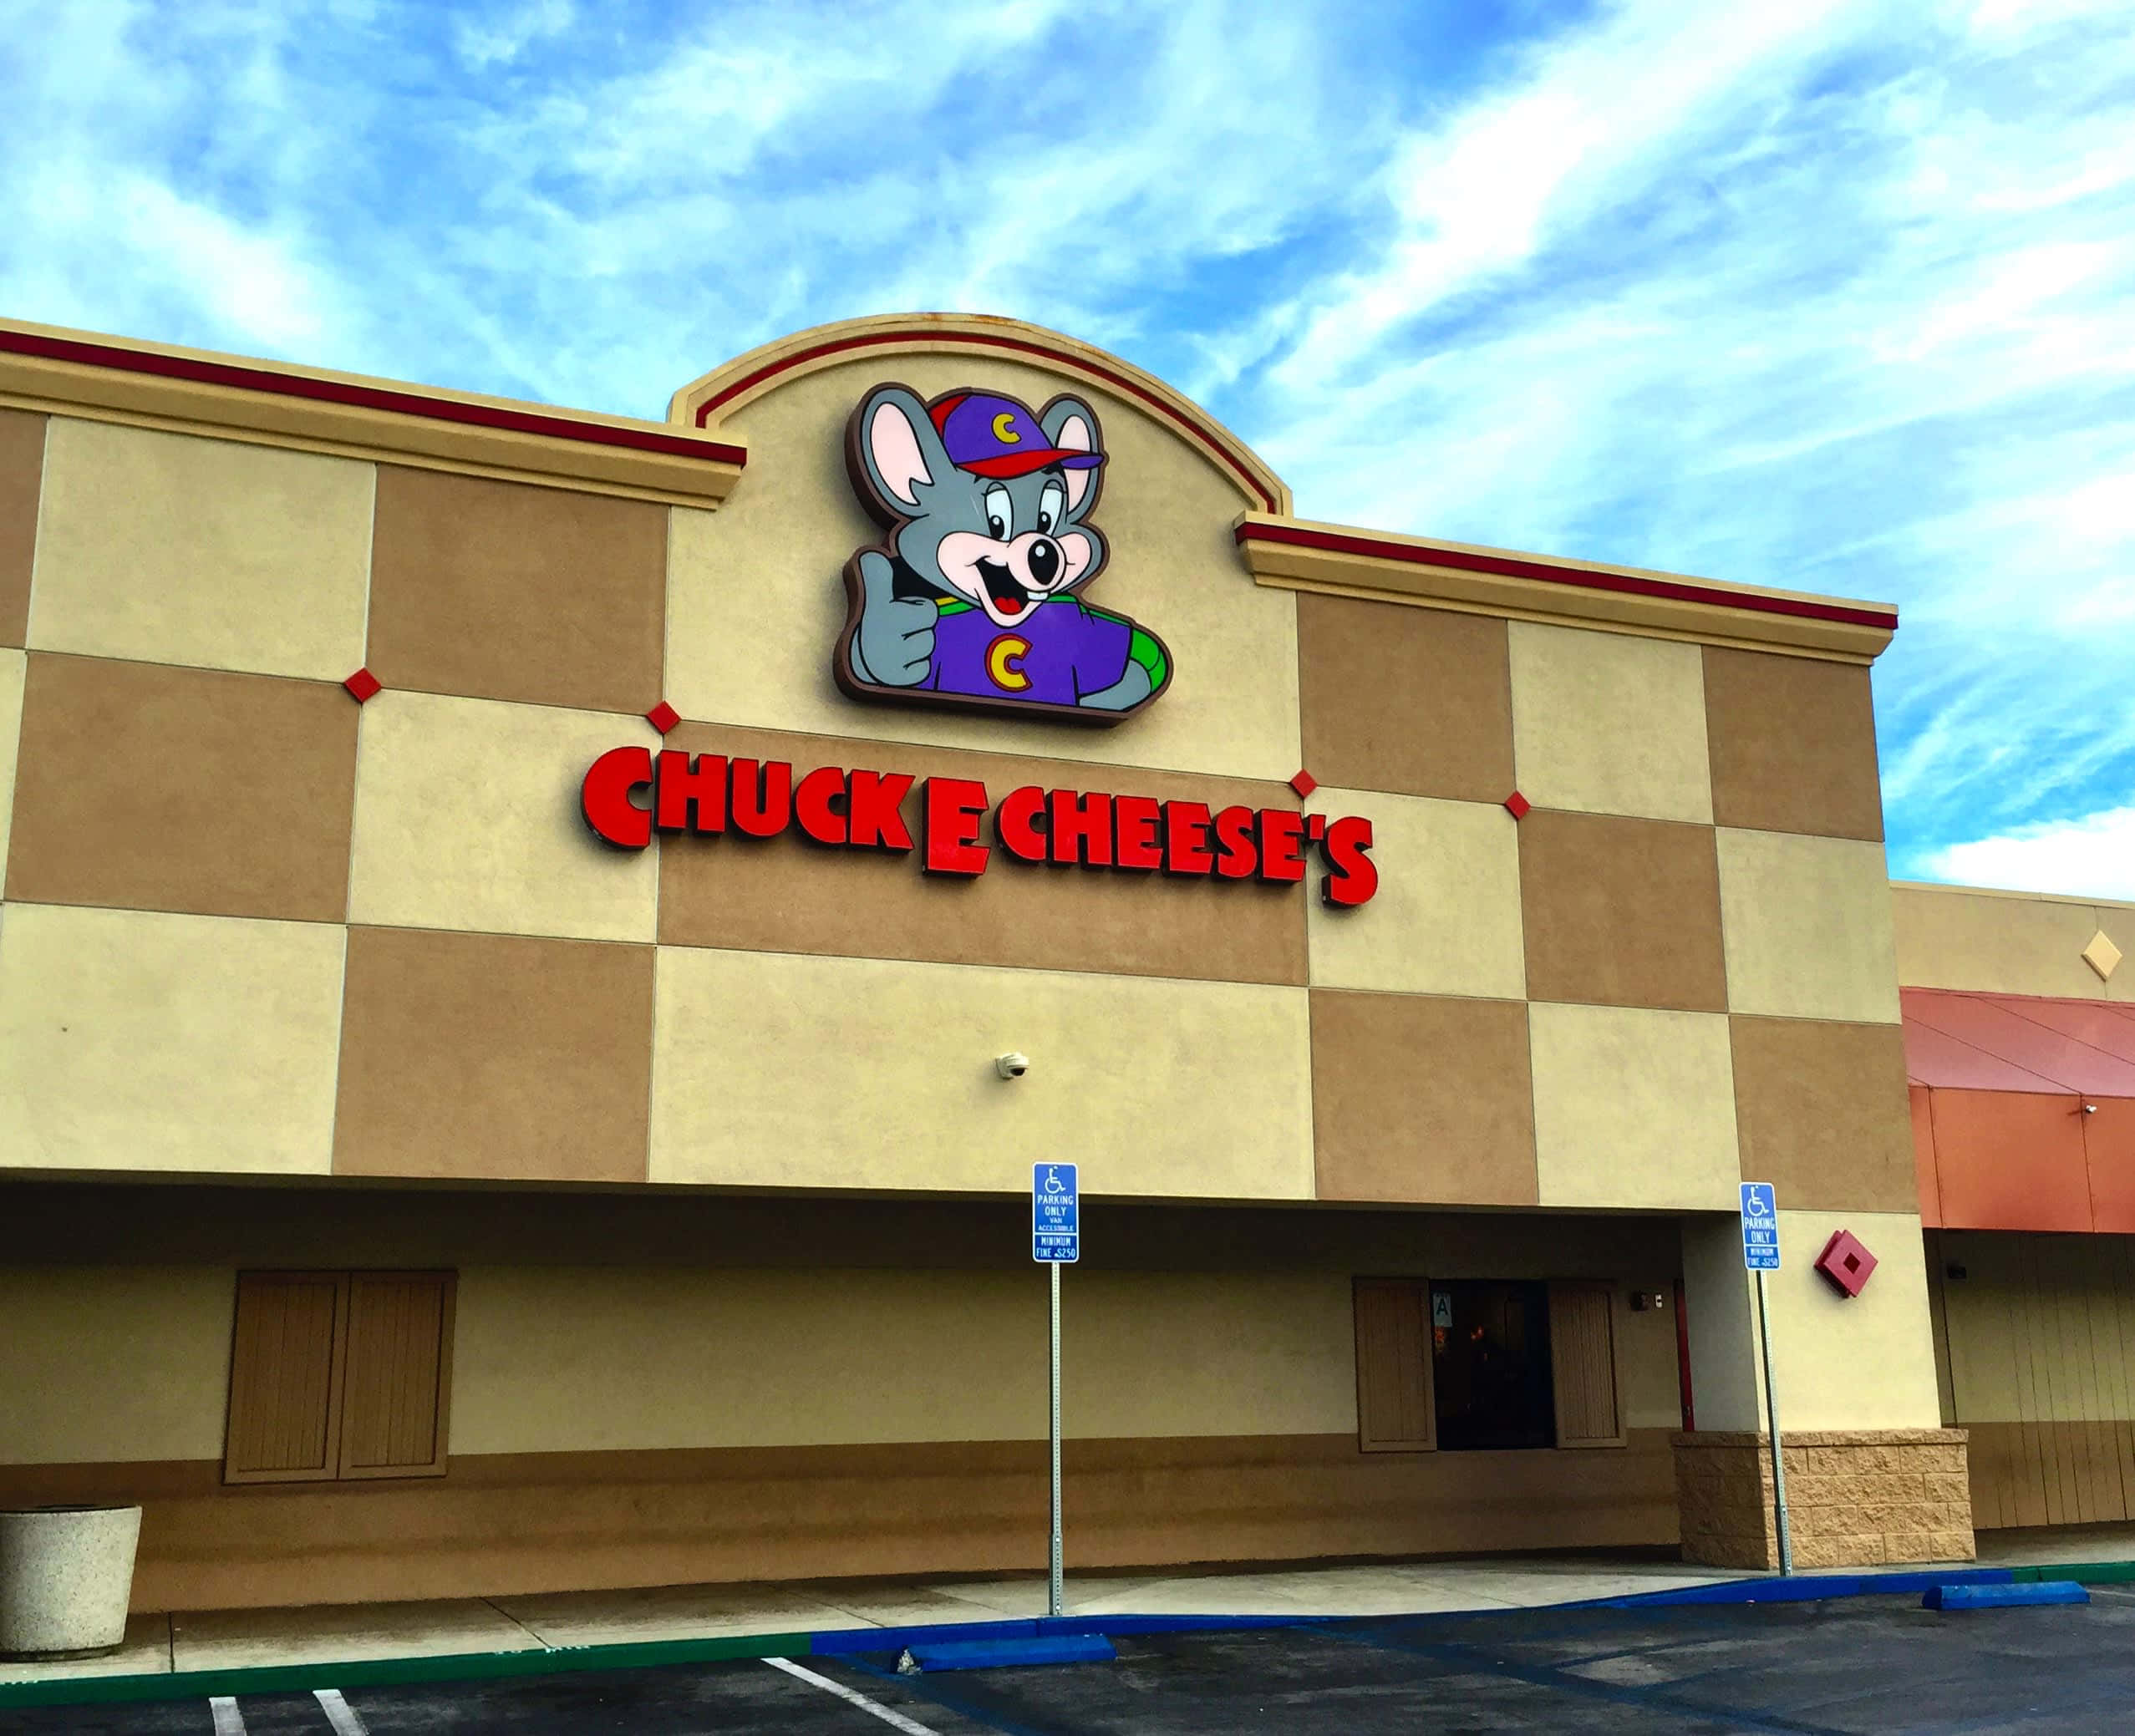 If you're looking for a family-friendly outing, Chuck E. Cheese’s is the place to go!